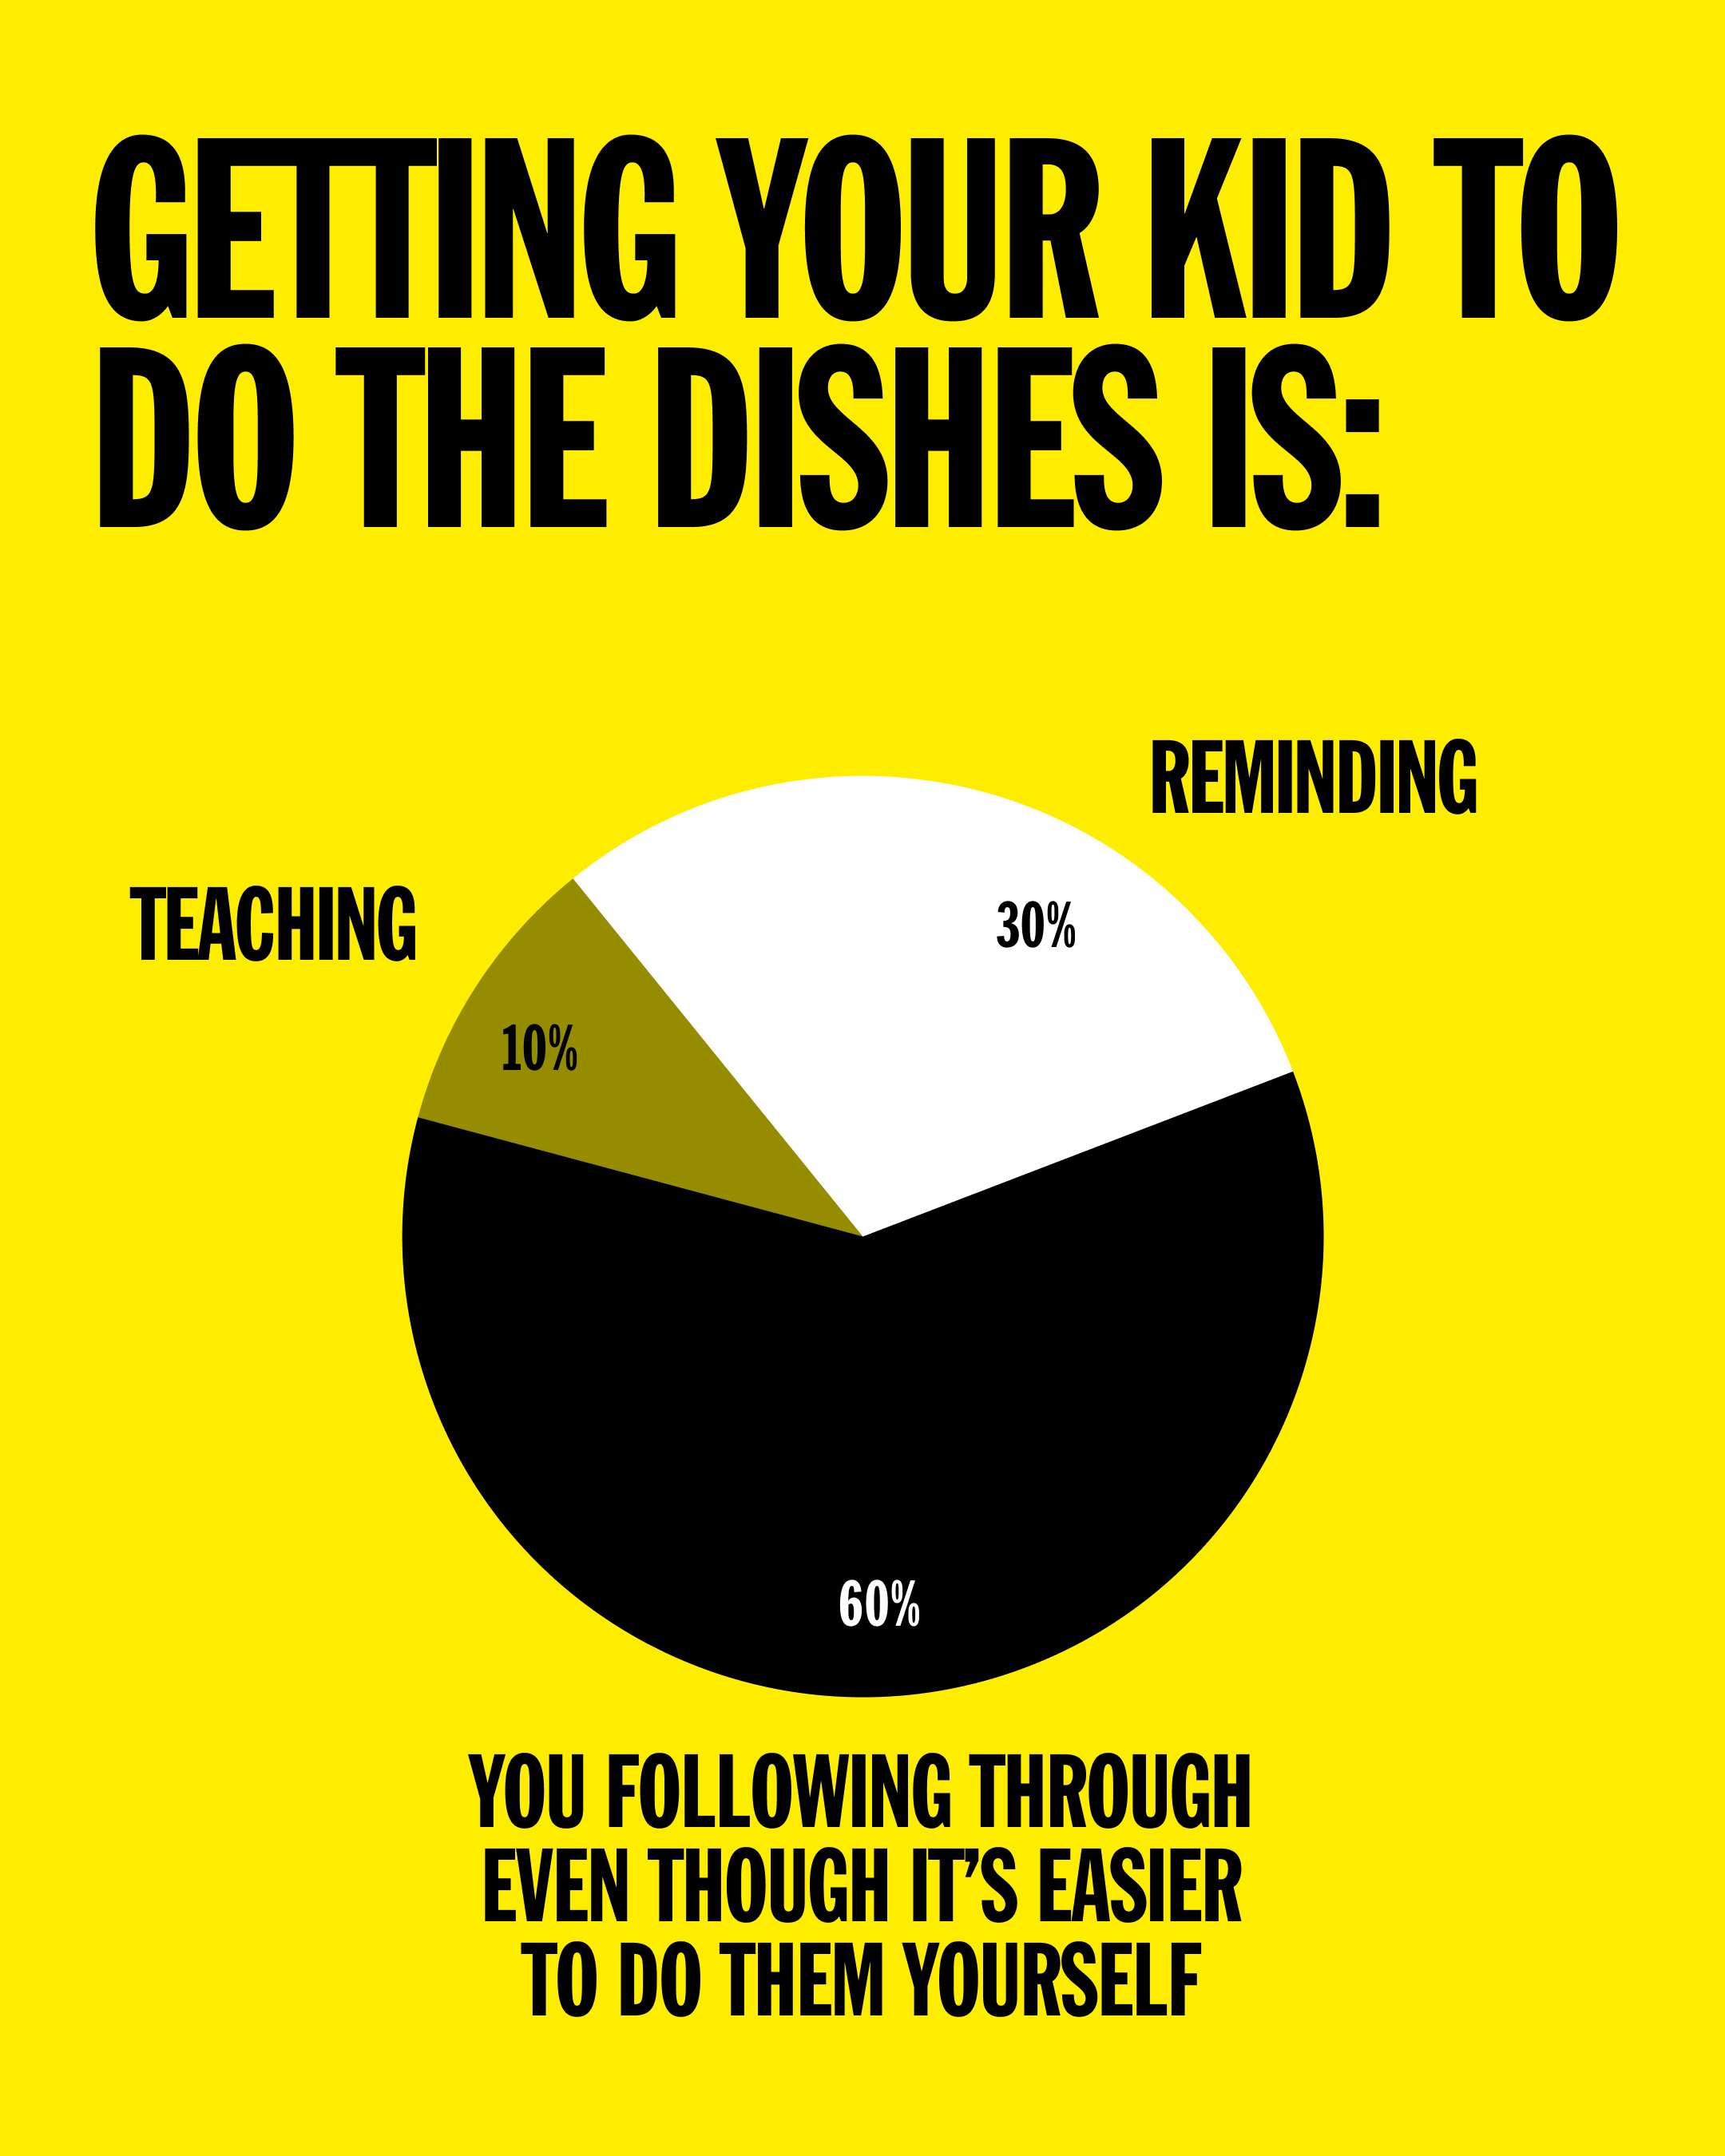 Getting your kid to do the dishes is 10% teaching, 30% reminding, and 60% you following through even though it’s easier to do them yourself